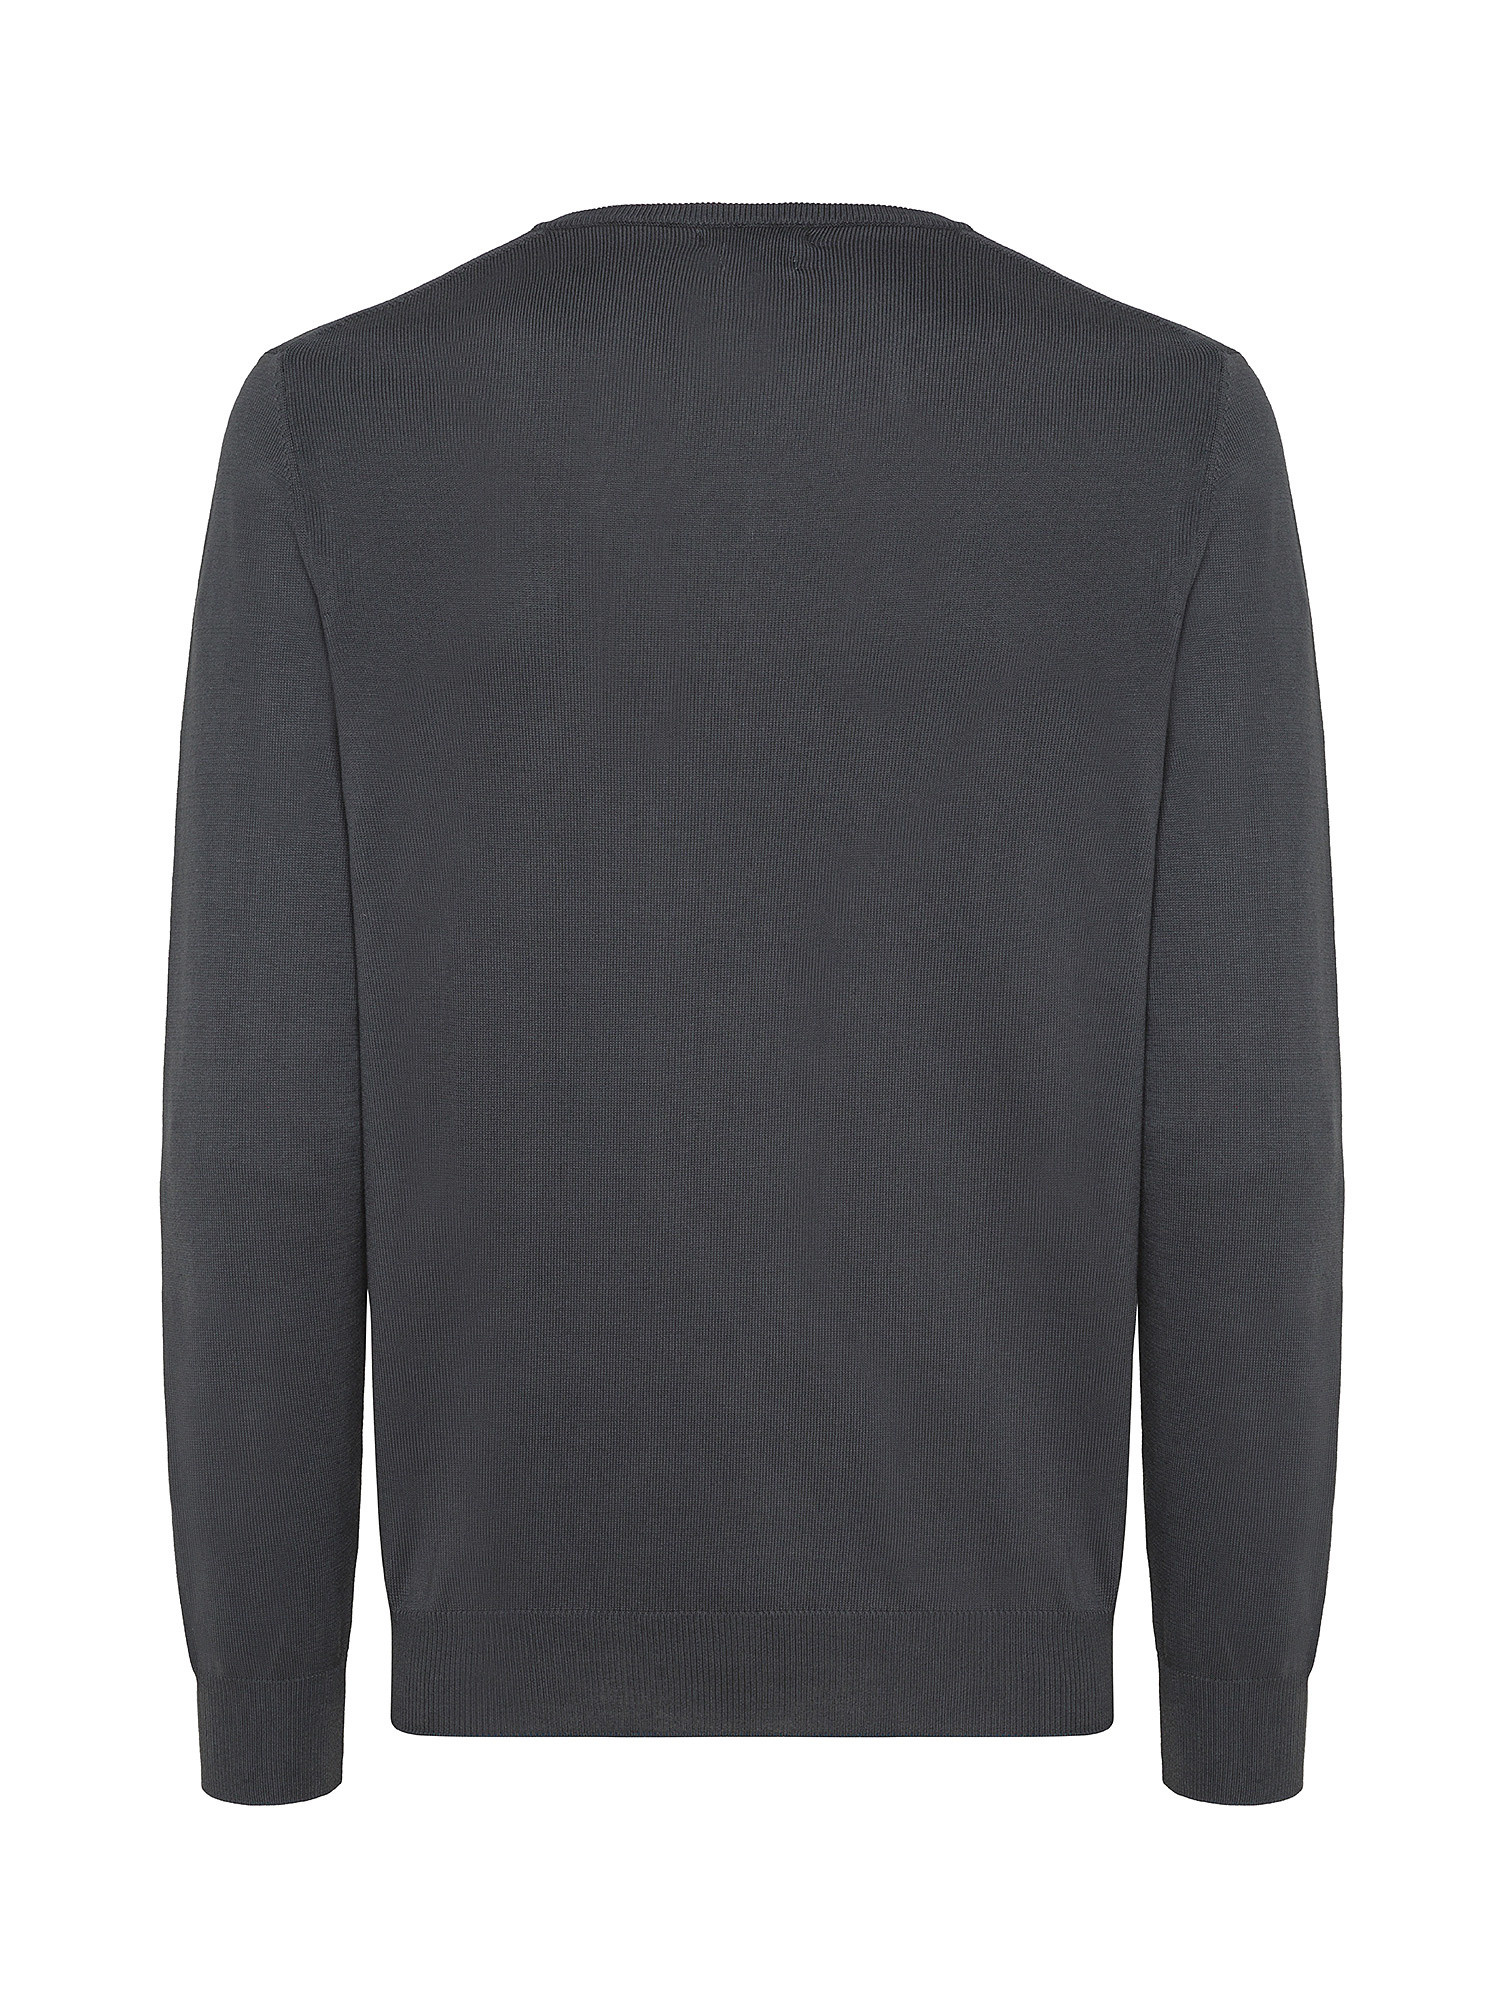 Luca D'Altieri - Crew neck sweater in extrafine pure cotton, Anthracite, large image number 1